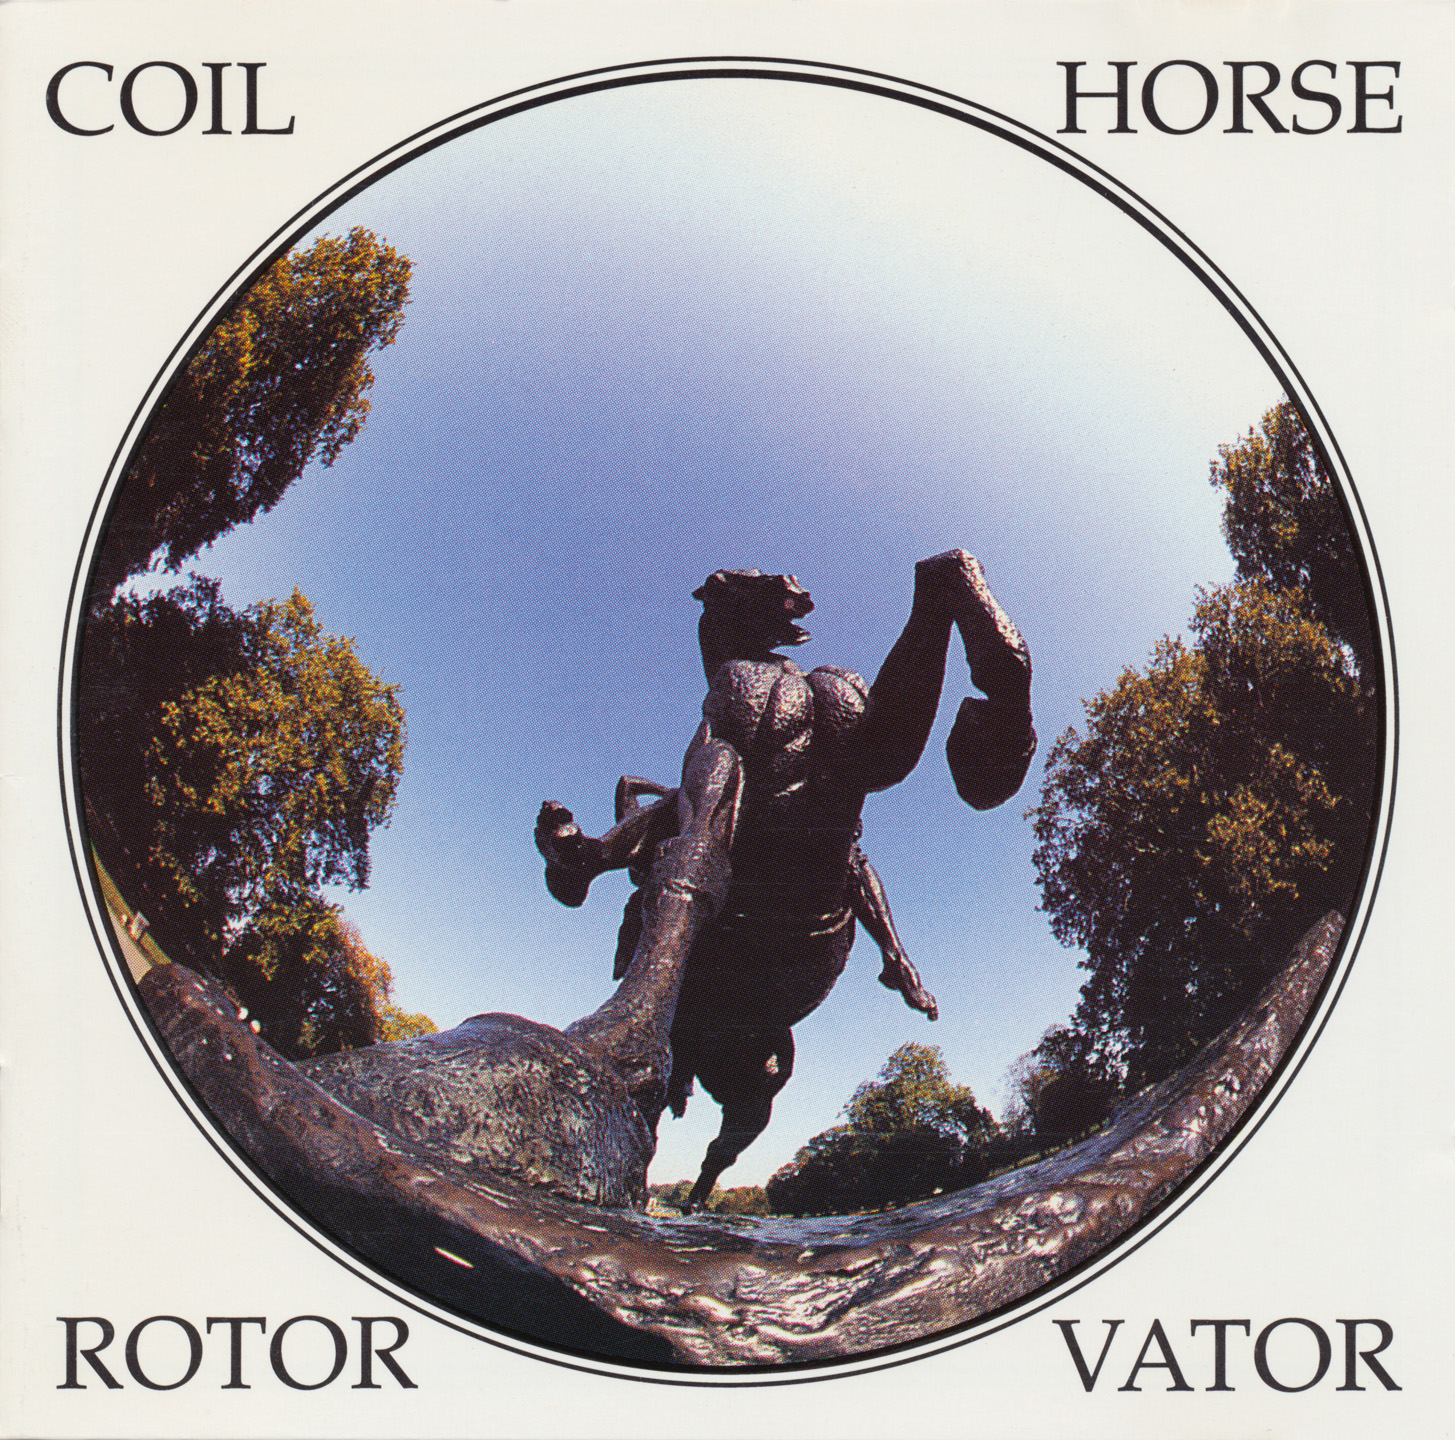 Coil - Horse Rotorvator (Original 1988 CD release) : Coil : Free 